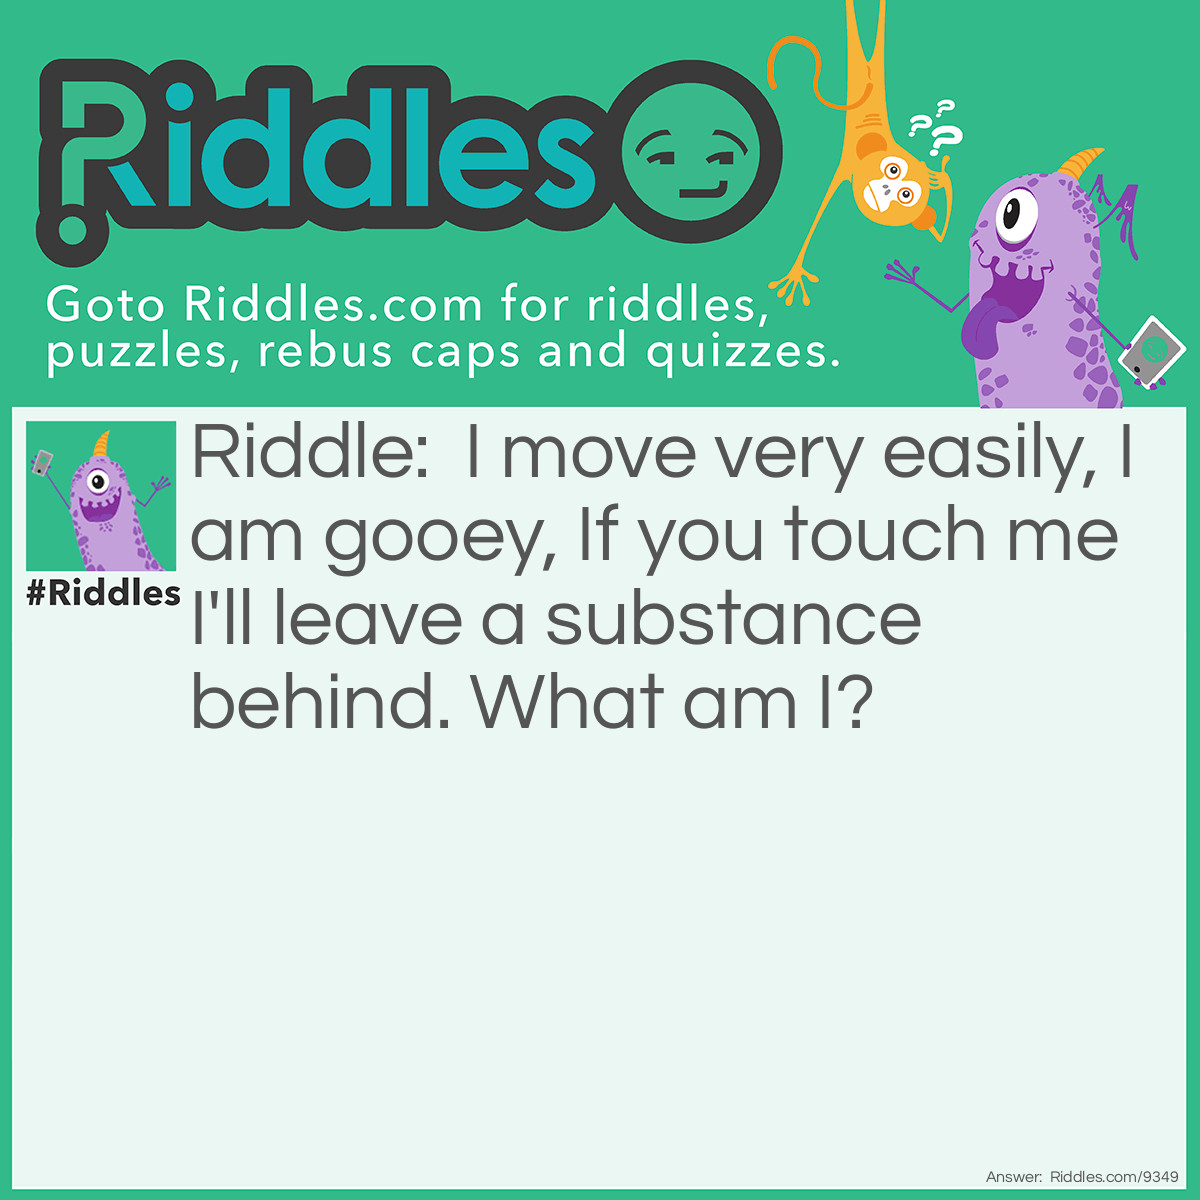 Riddle: I move very easily, I am gooey, If you touch me I'll leave a substance behind. What am I? Answer: Slime.